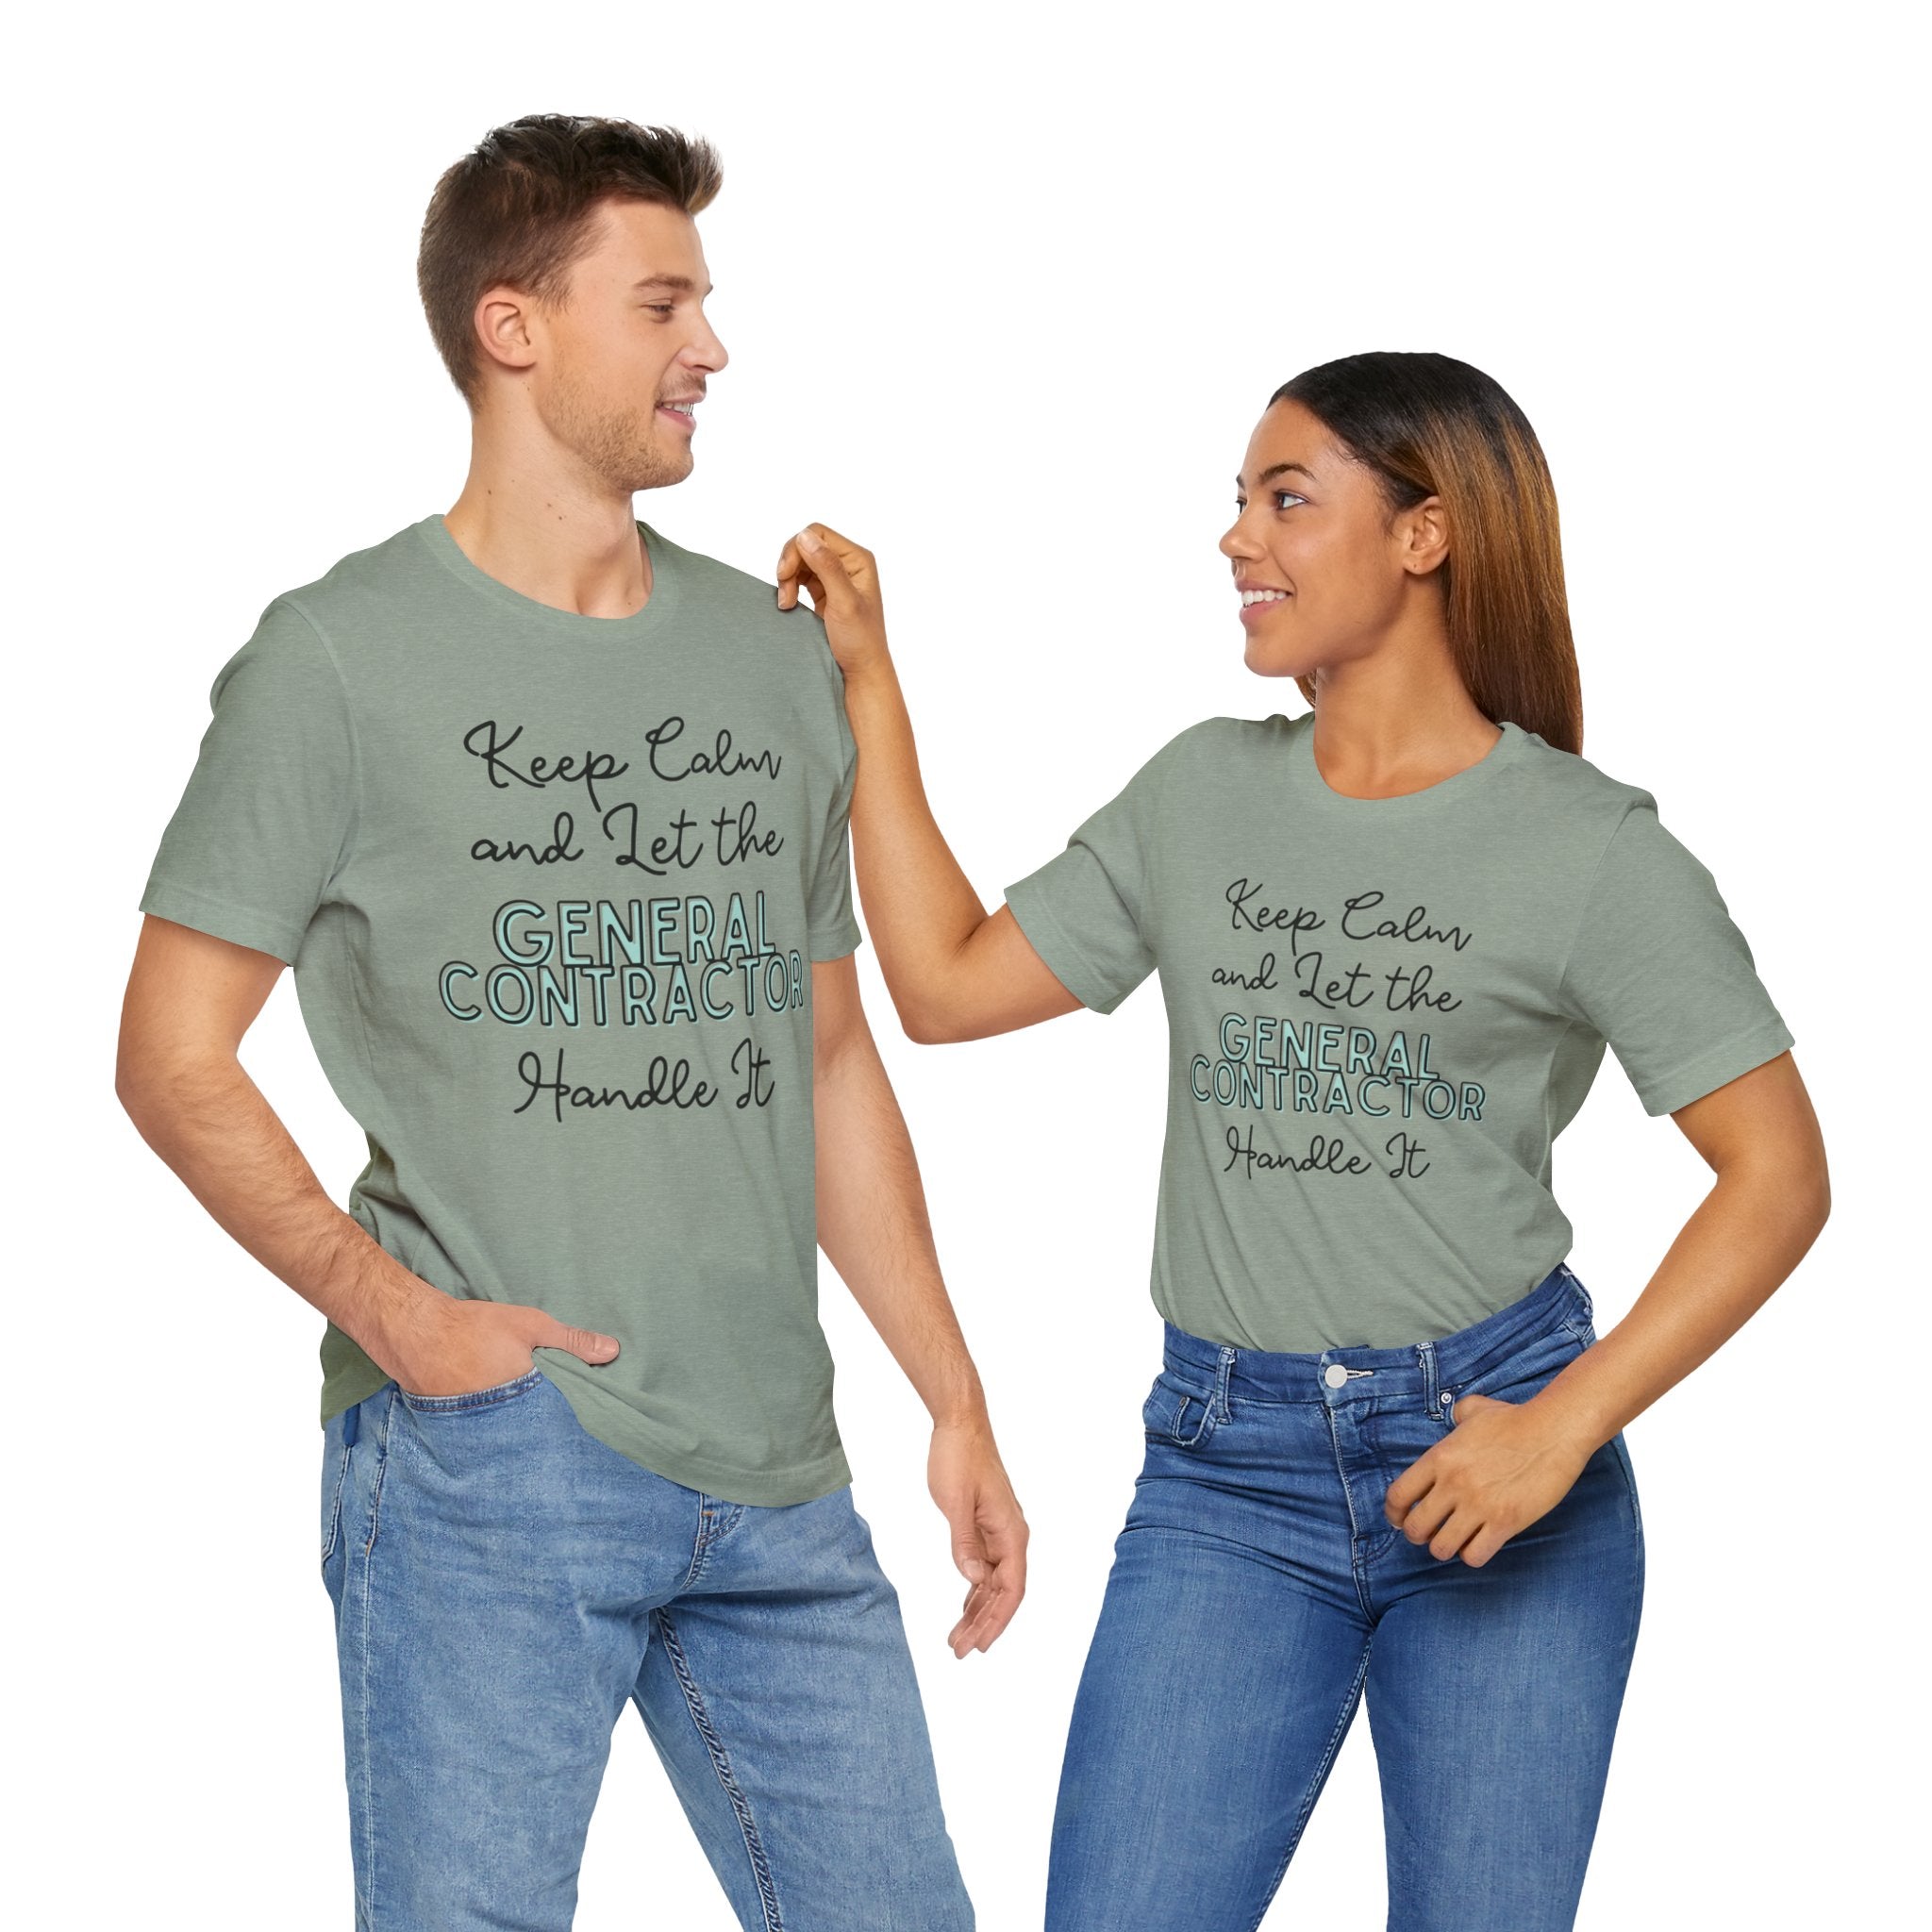 Keep Calm and let the General Contractor handle It - Jersey Short Sleeve Tee